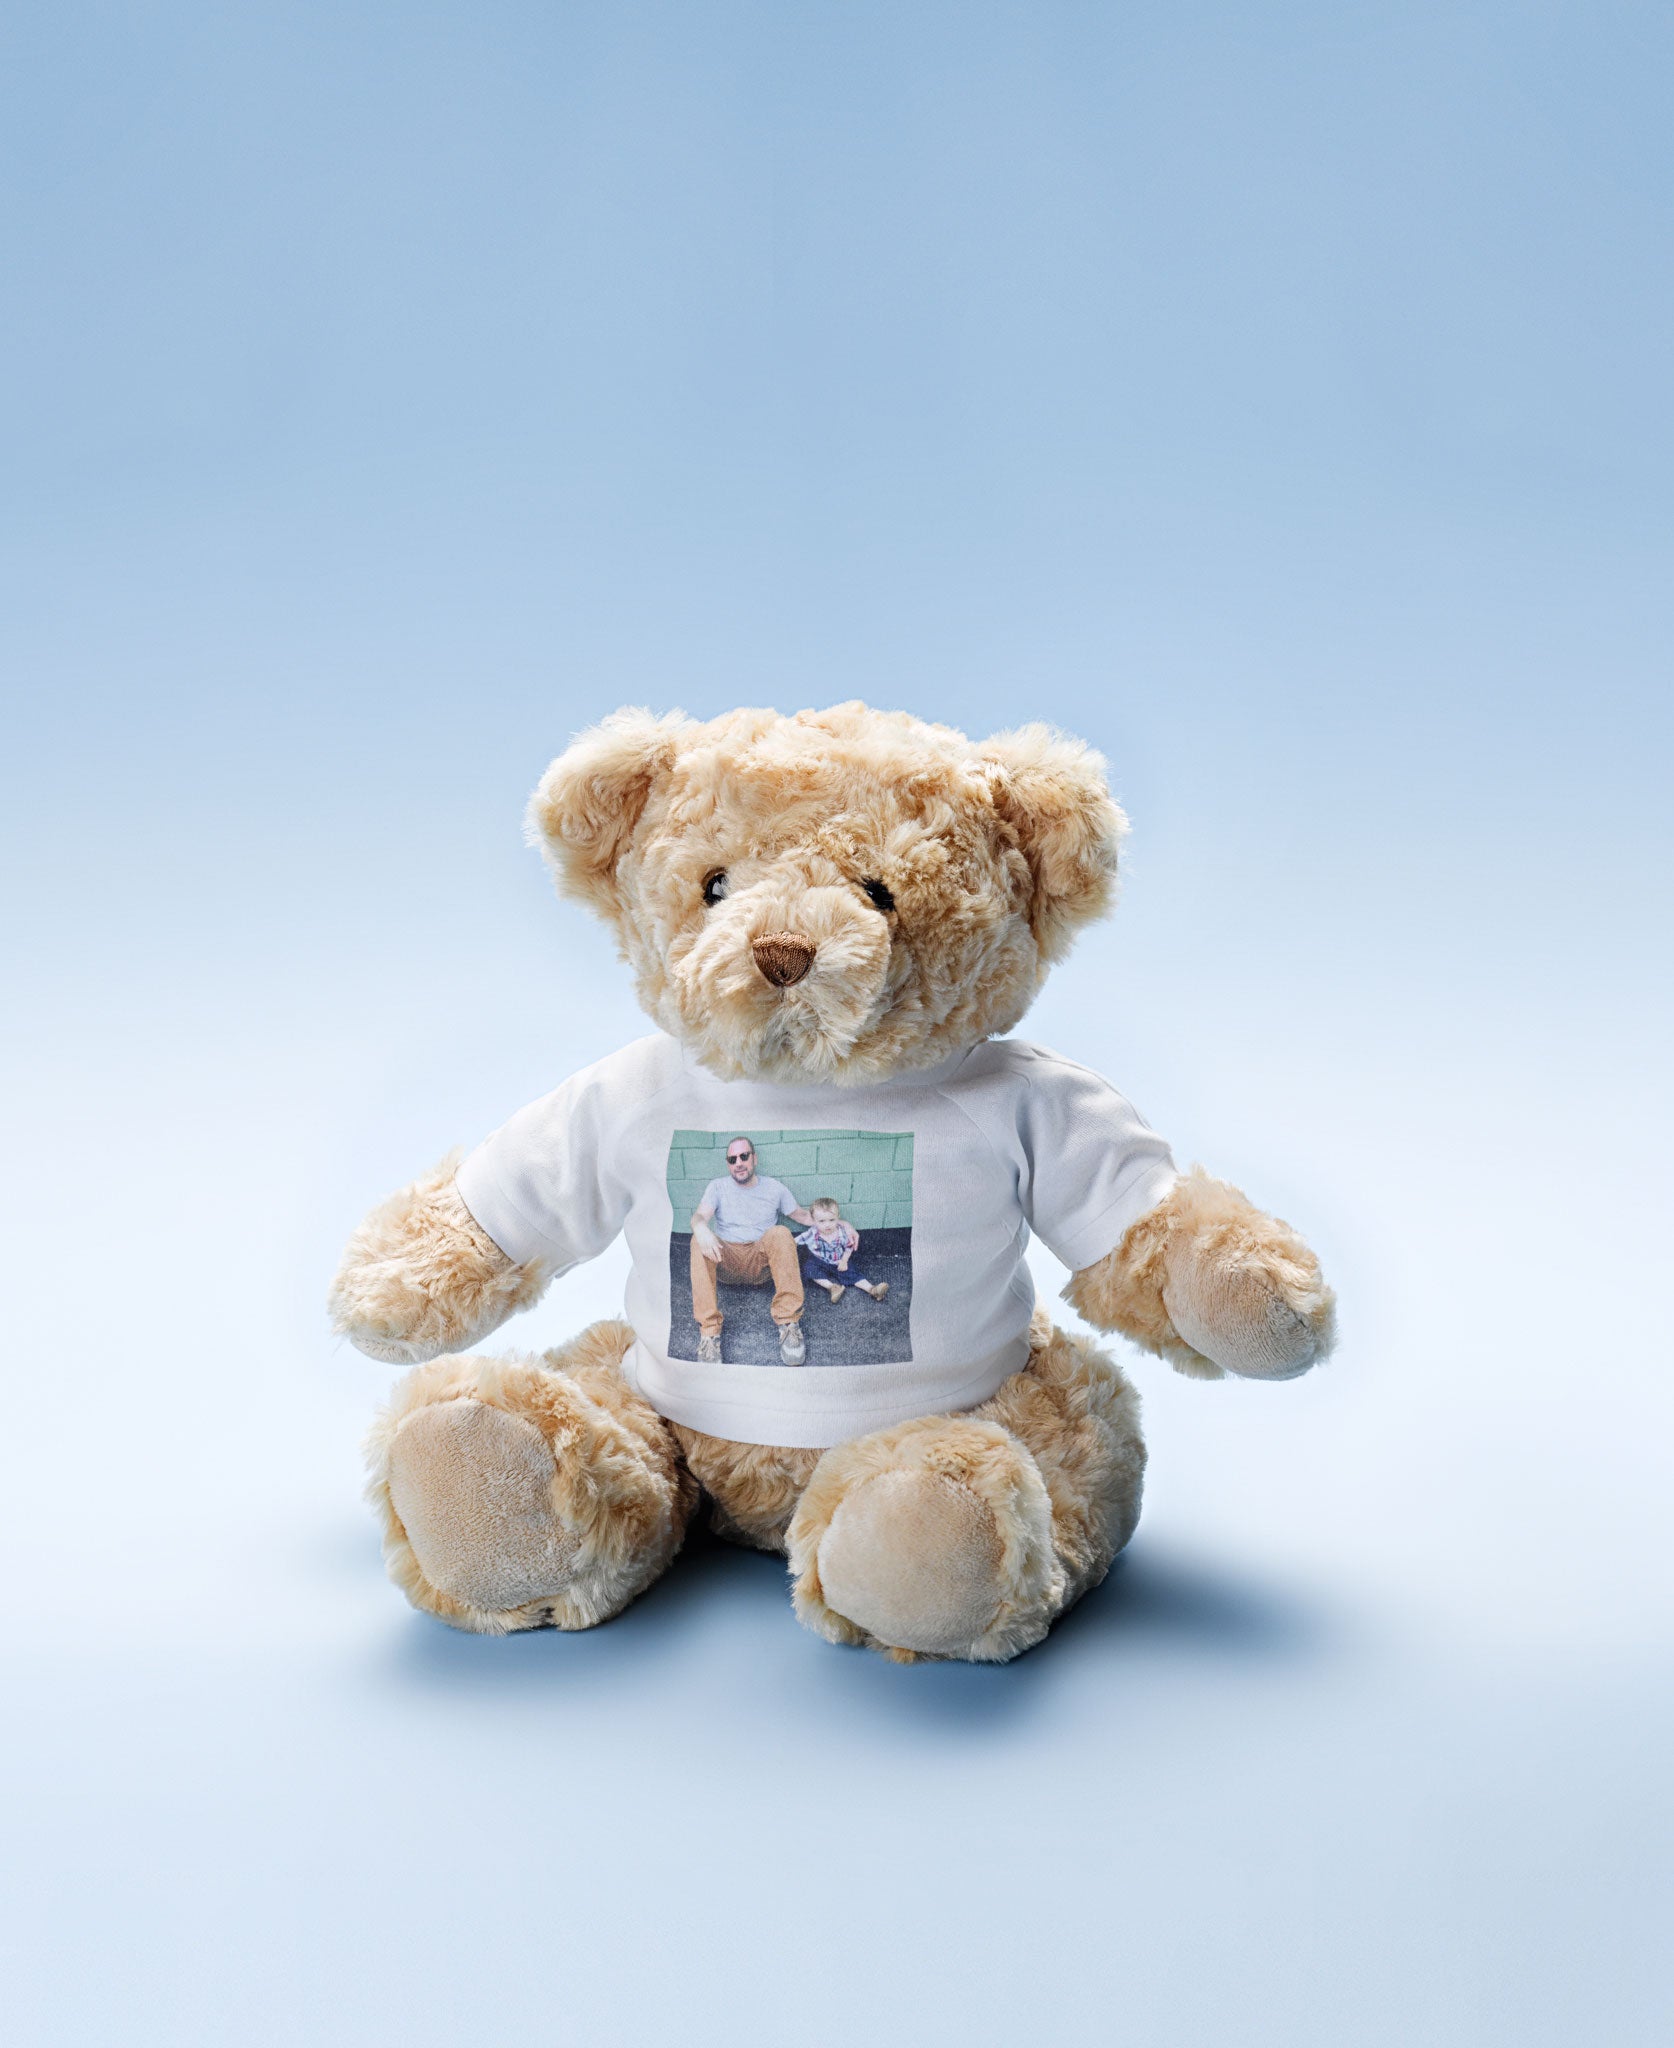 Bear necessities: Specialised personal-product printing has survived and thrived through recession